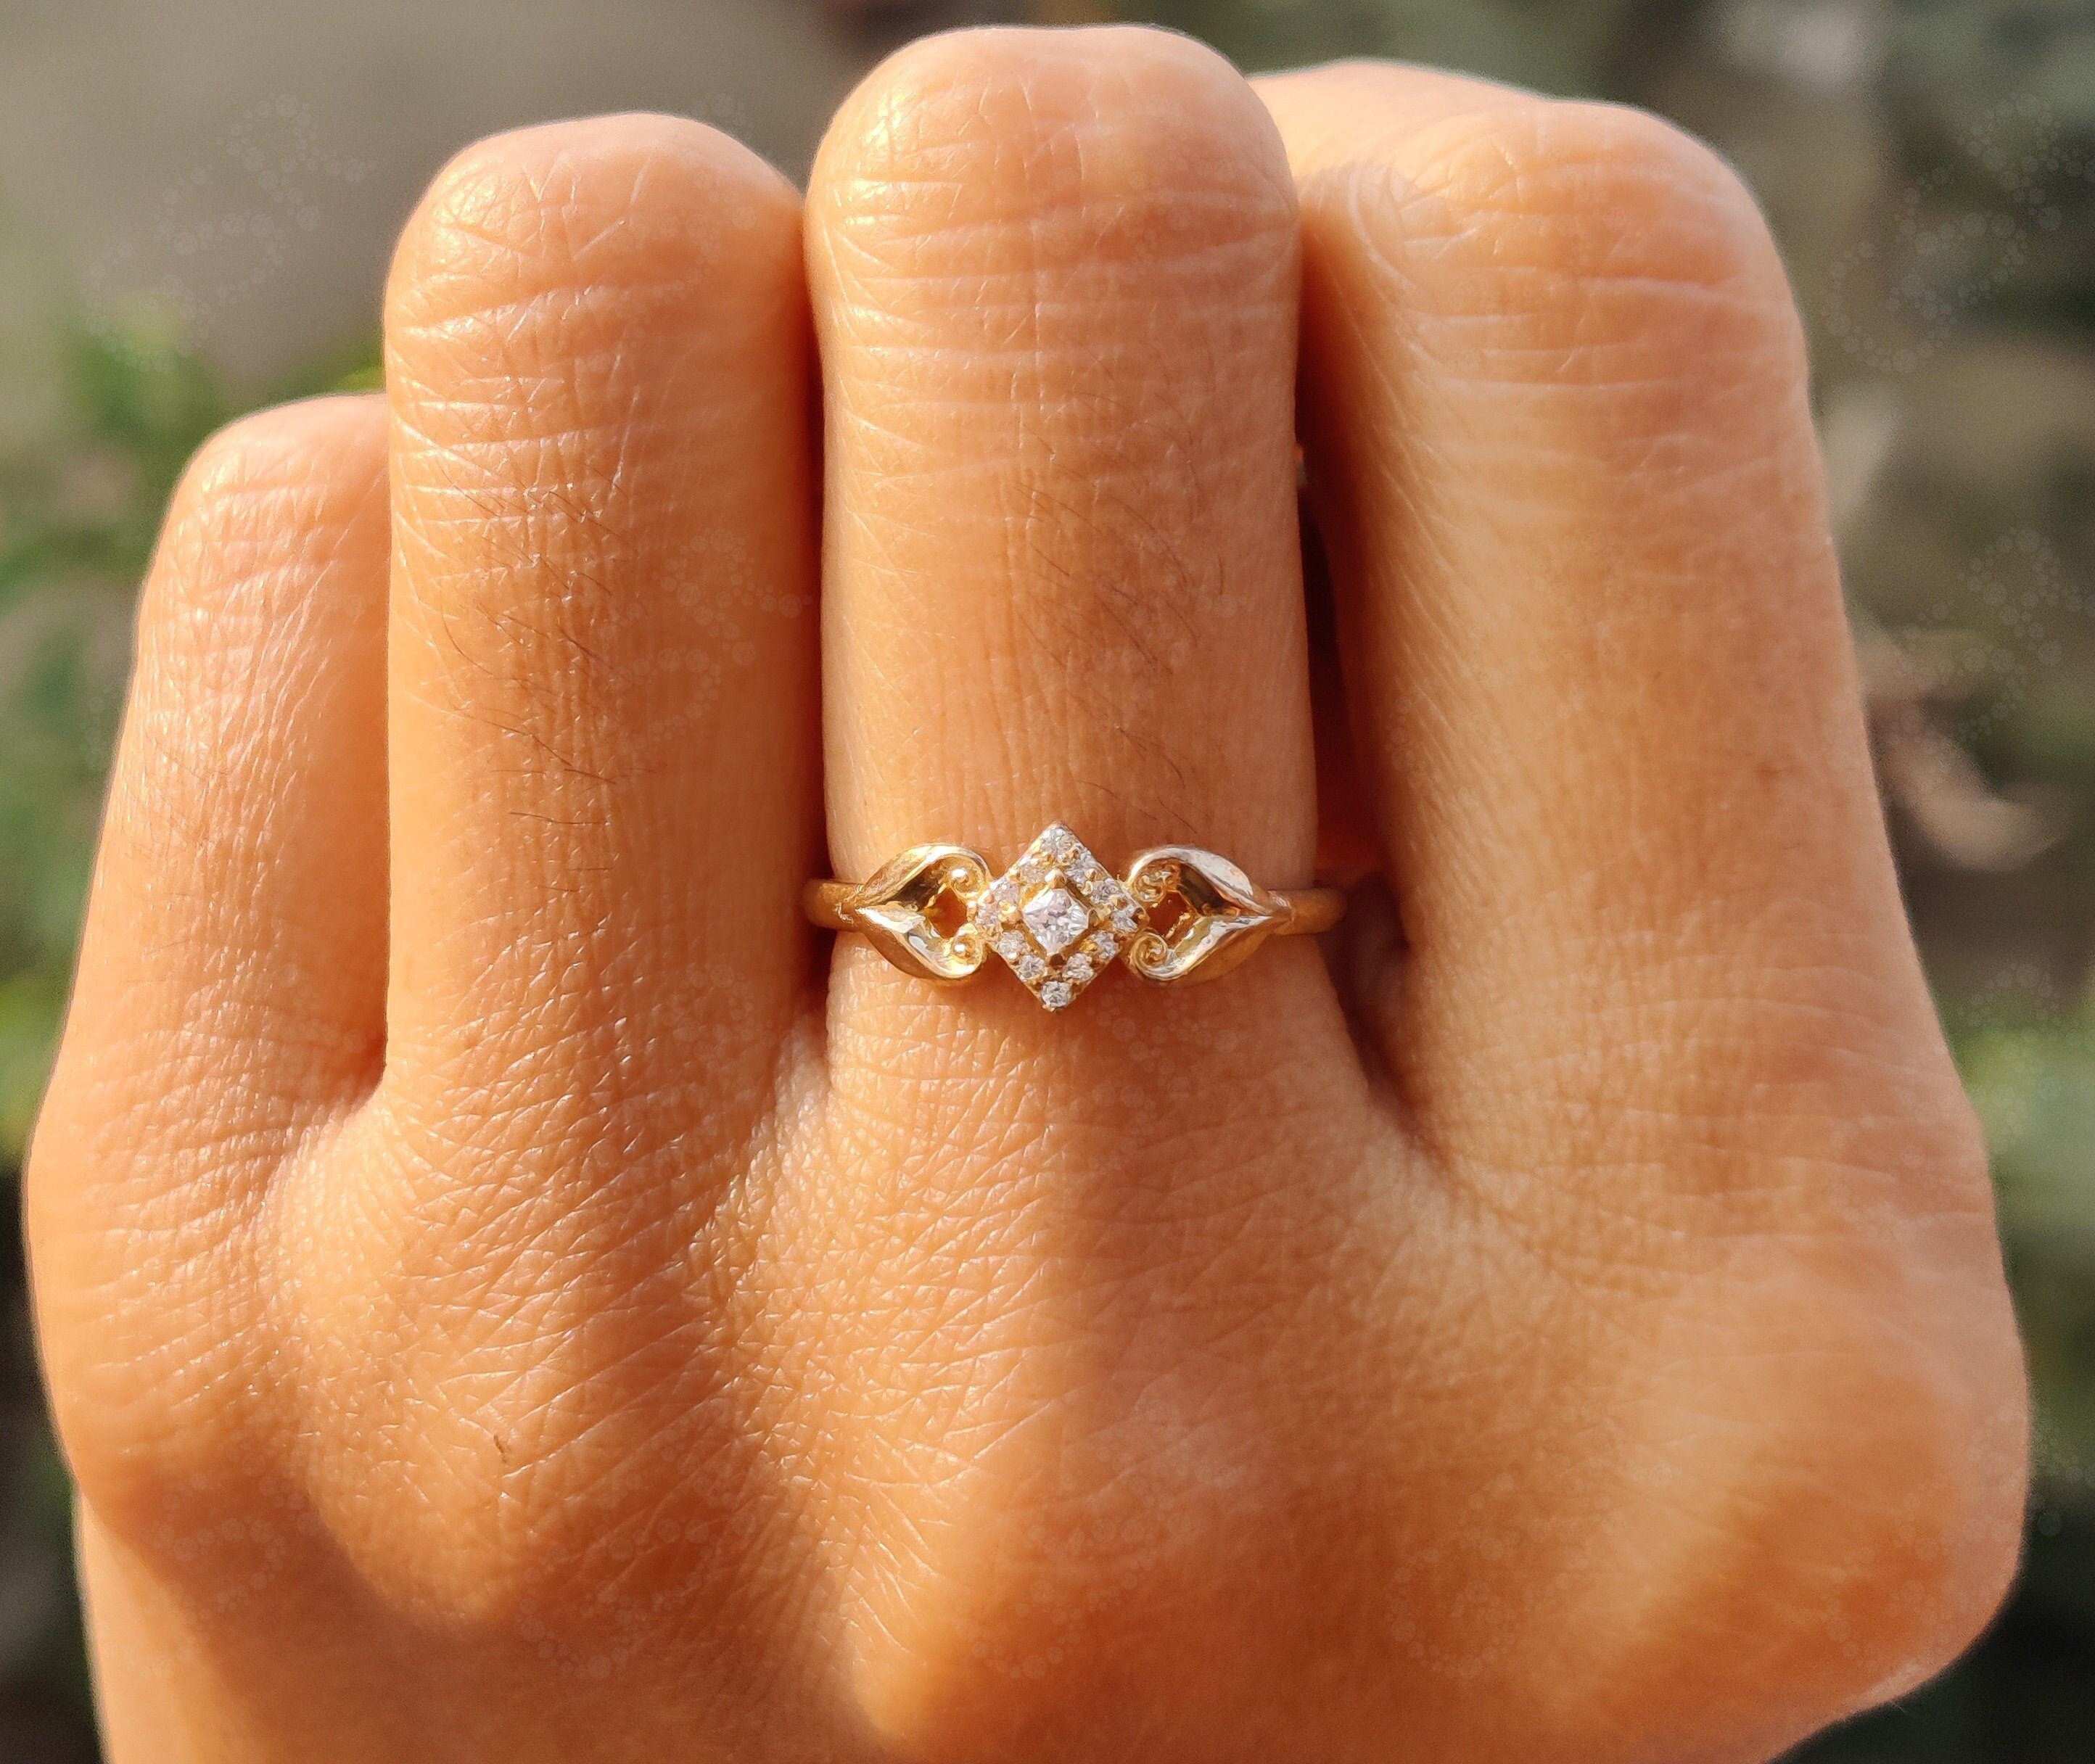 Timeless Charm: Vintage Art Deco Moissanite Stackable Ring in Silver and Solid Gold - A Dainty Minimalist Promise for Women